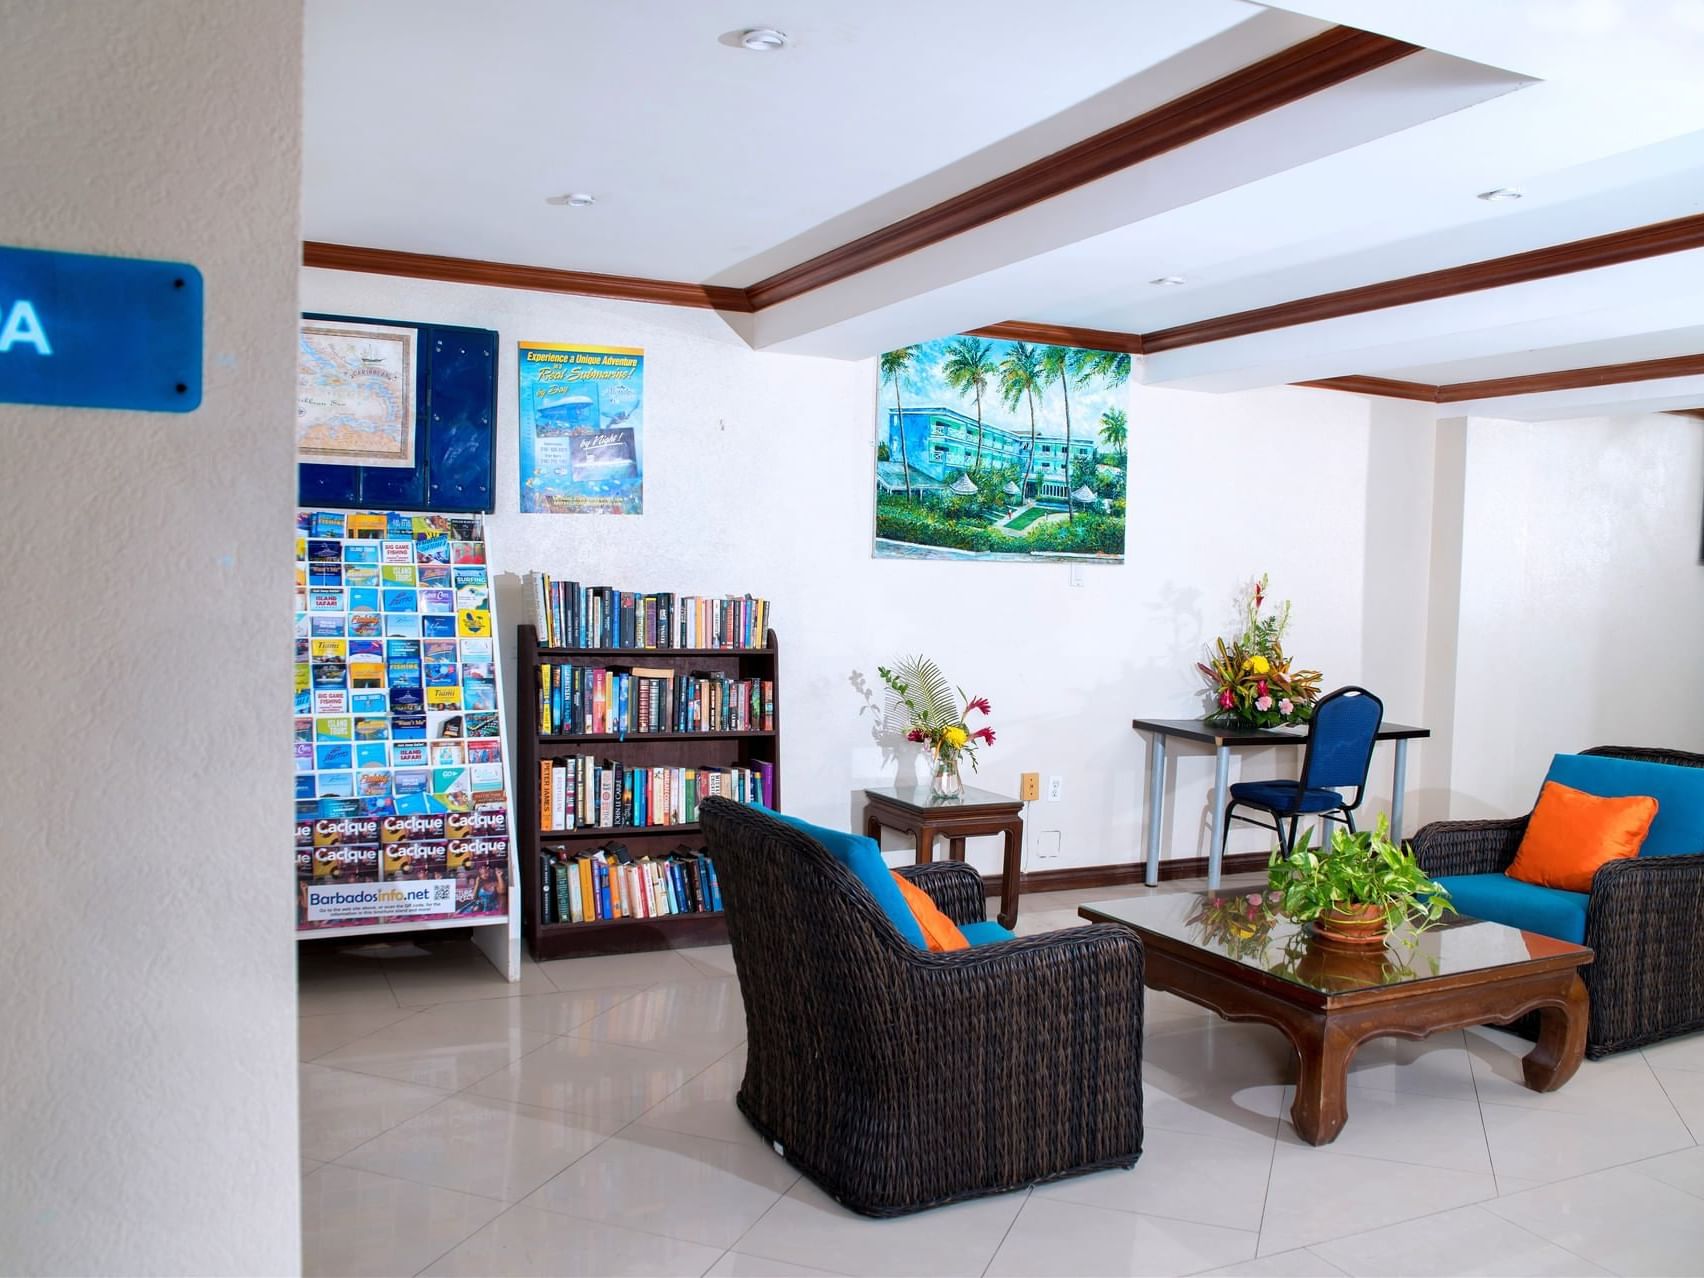 Lounge area with book shelves & workspace at Dover Beach Hotel